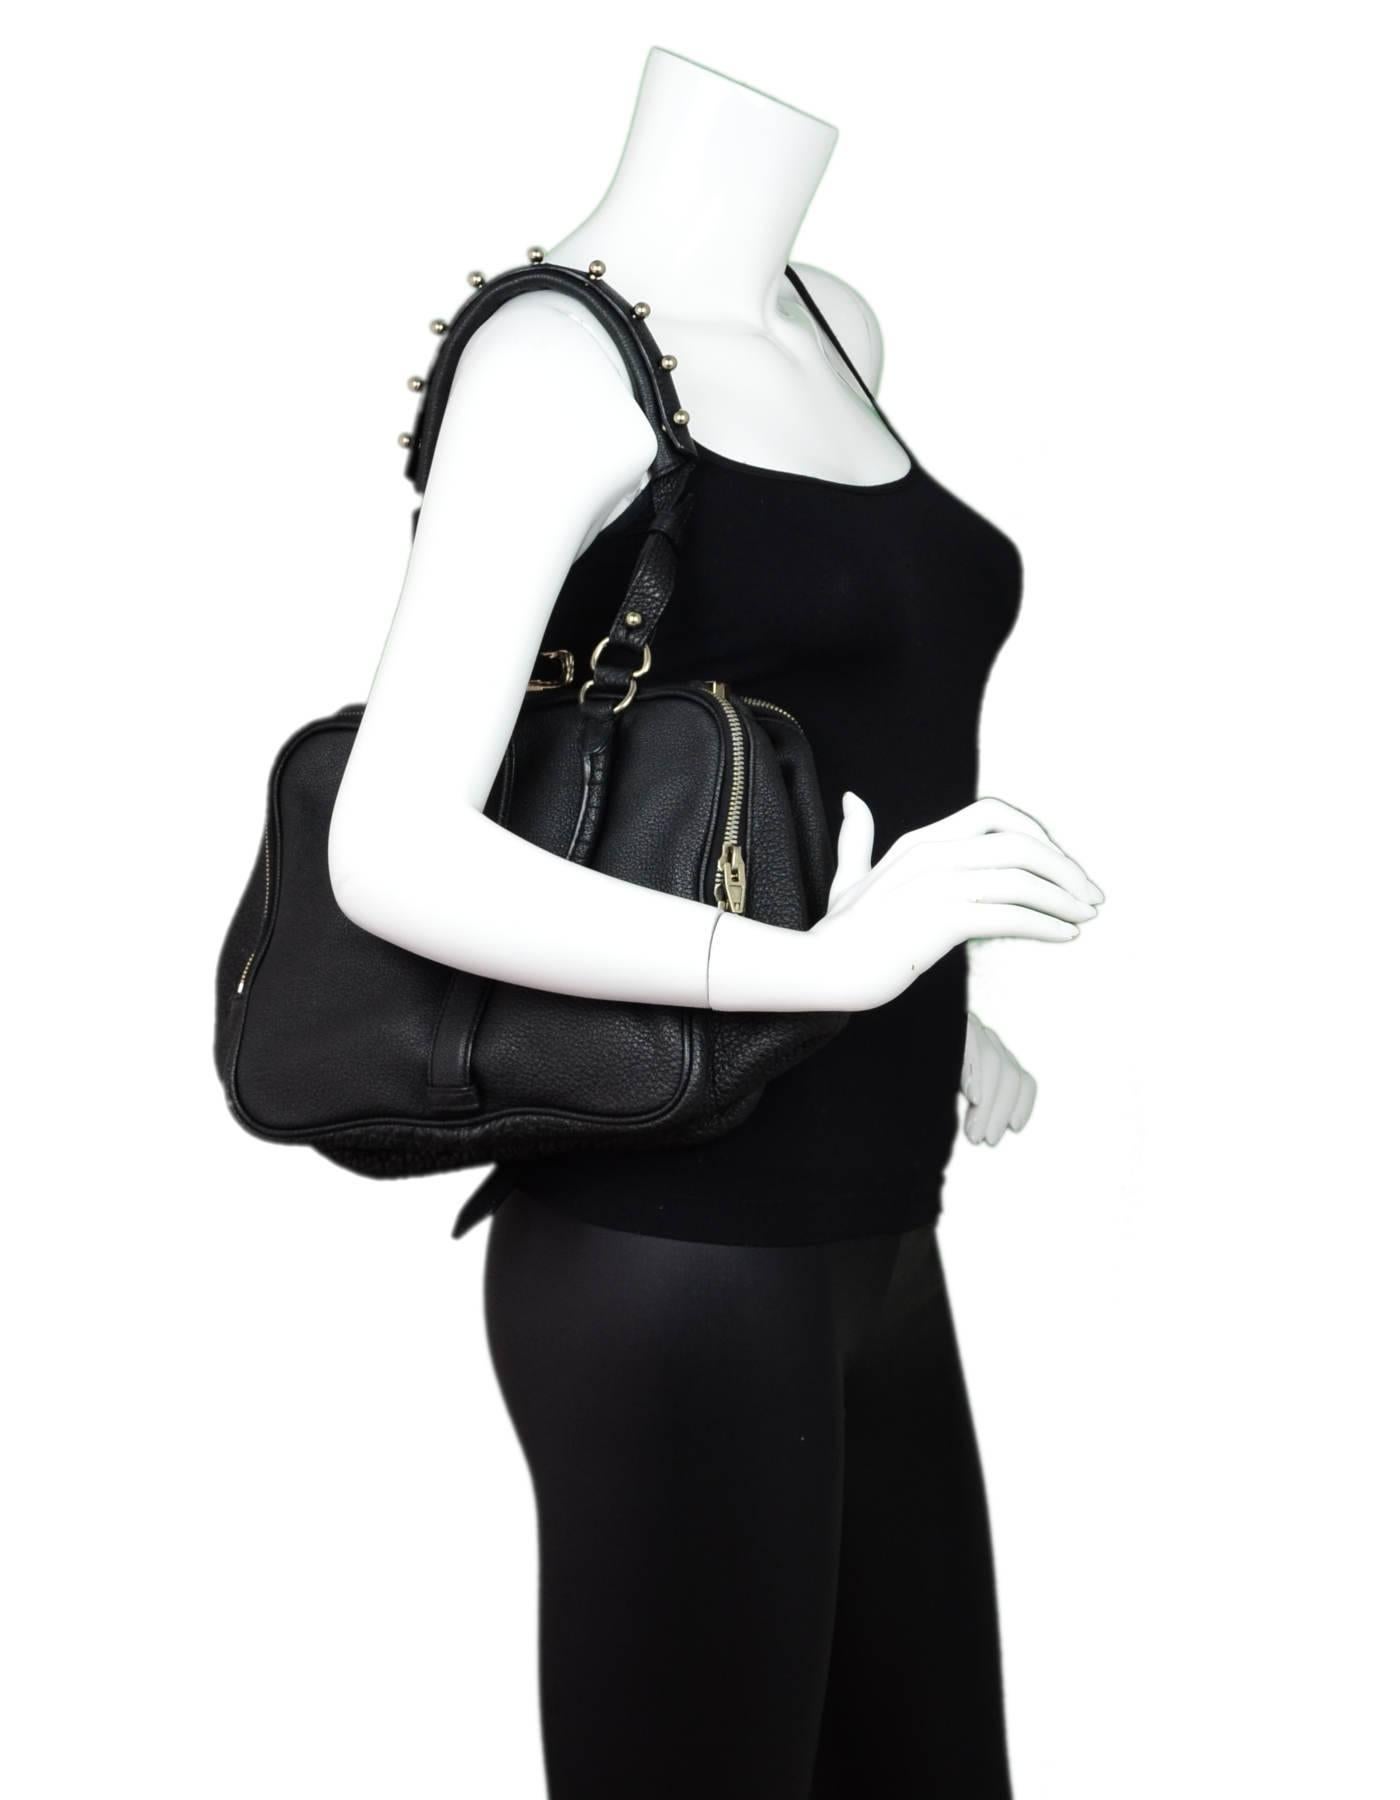 Alexander Wang Black Leather Anita Satchel

Color: Black
Materials: Leather, metal
Hardware: Silvertone
Lining: Black textile
Closure/Opening: Frame top with snap closure and center strap
Exterior Pockets: Zip compartments at each side
Interior